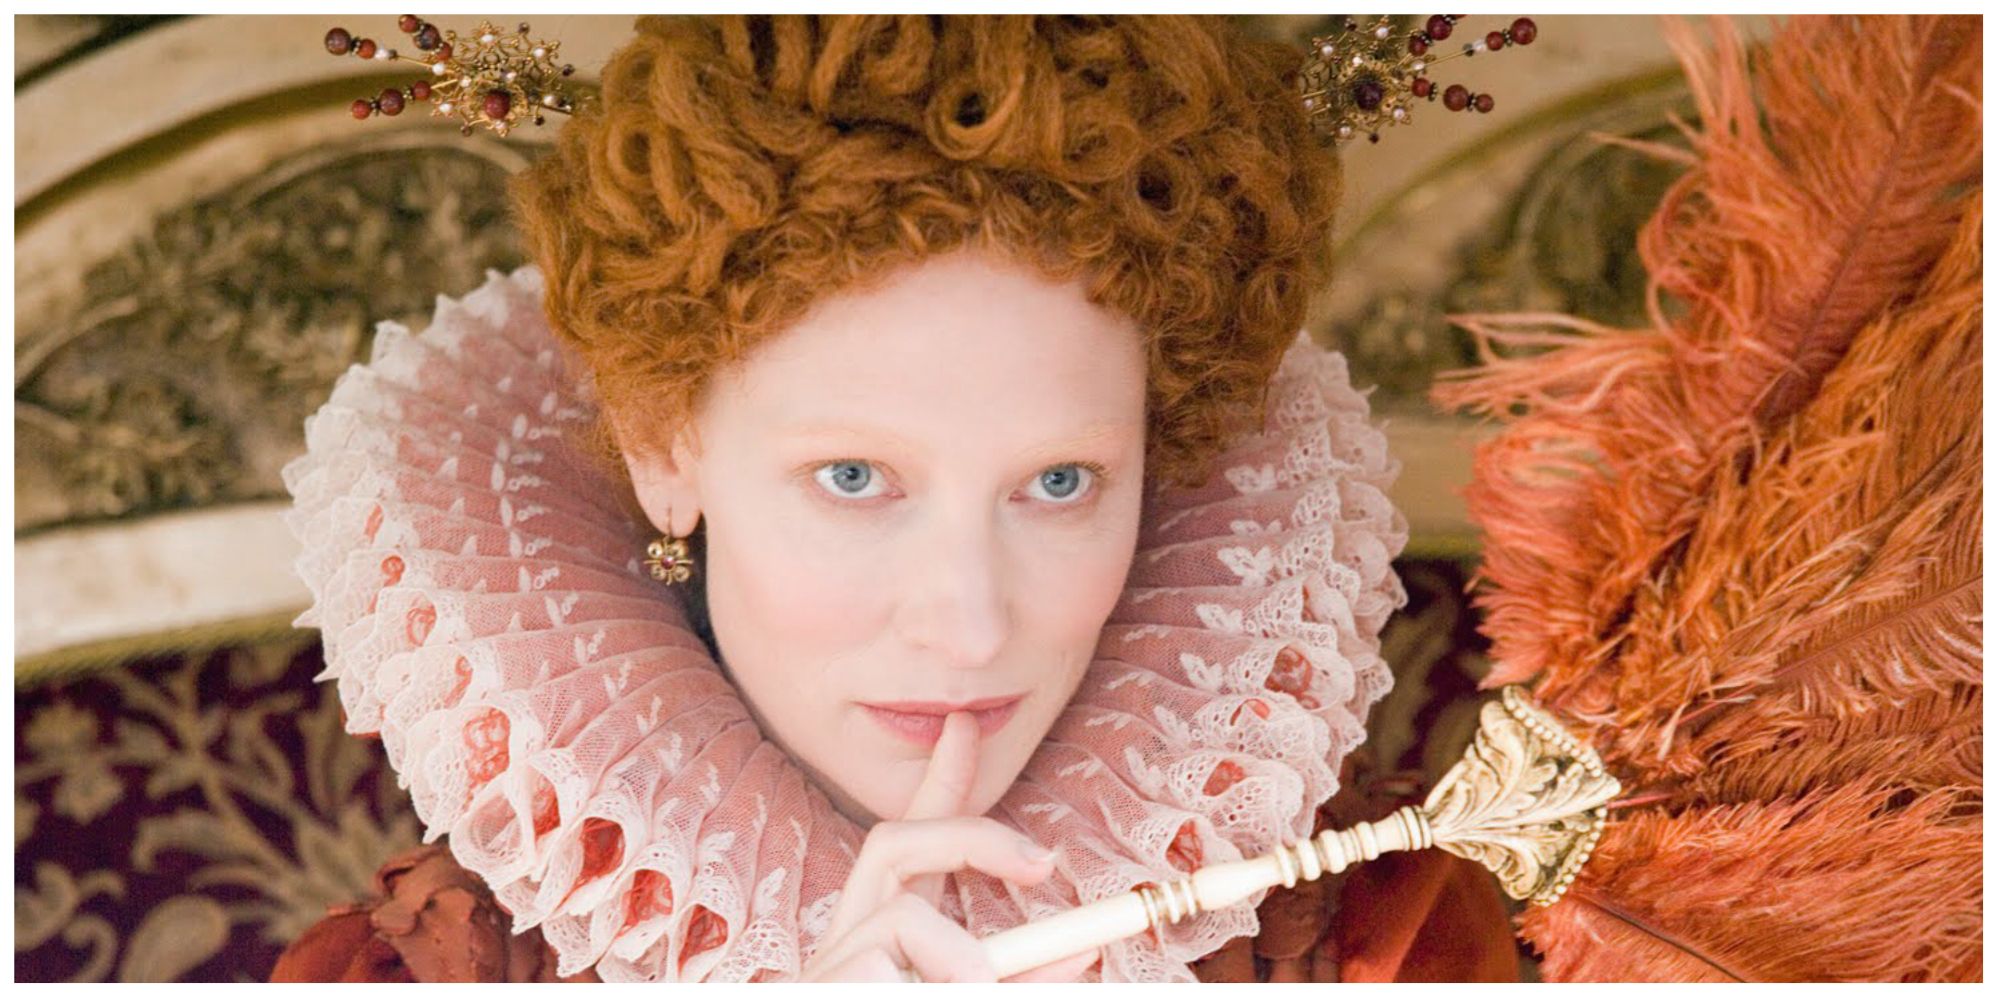 Cate Blanchett as Queen Elizabeth I in Elizabeth (1998) with her finger over her lips looking at something inquisitively offscreen